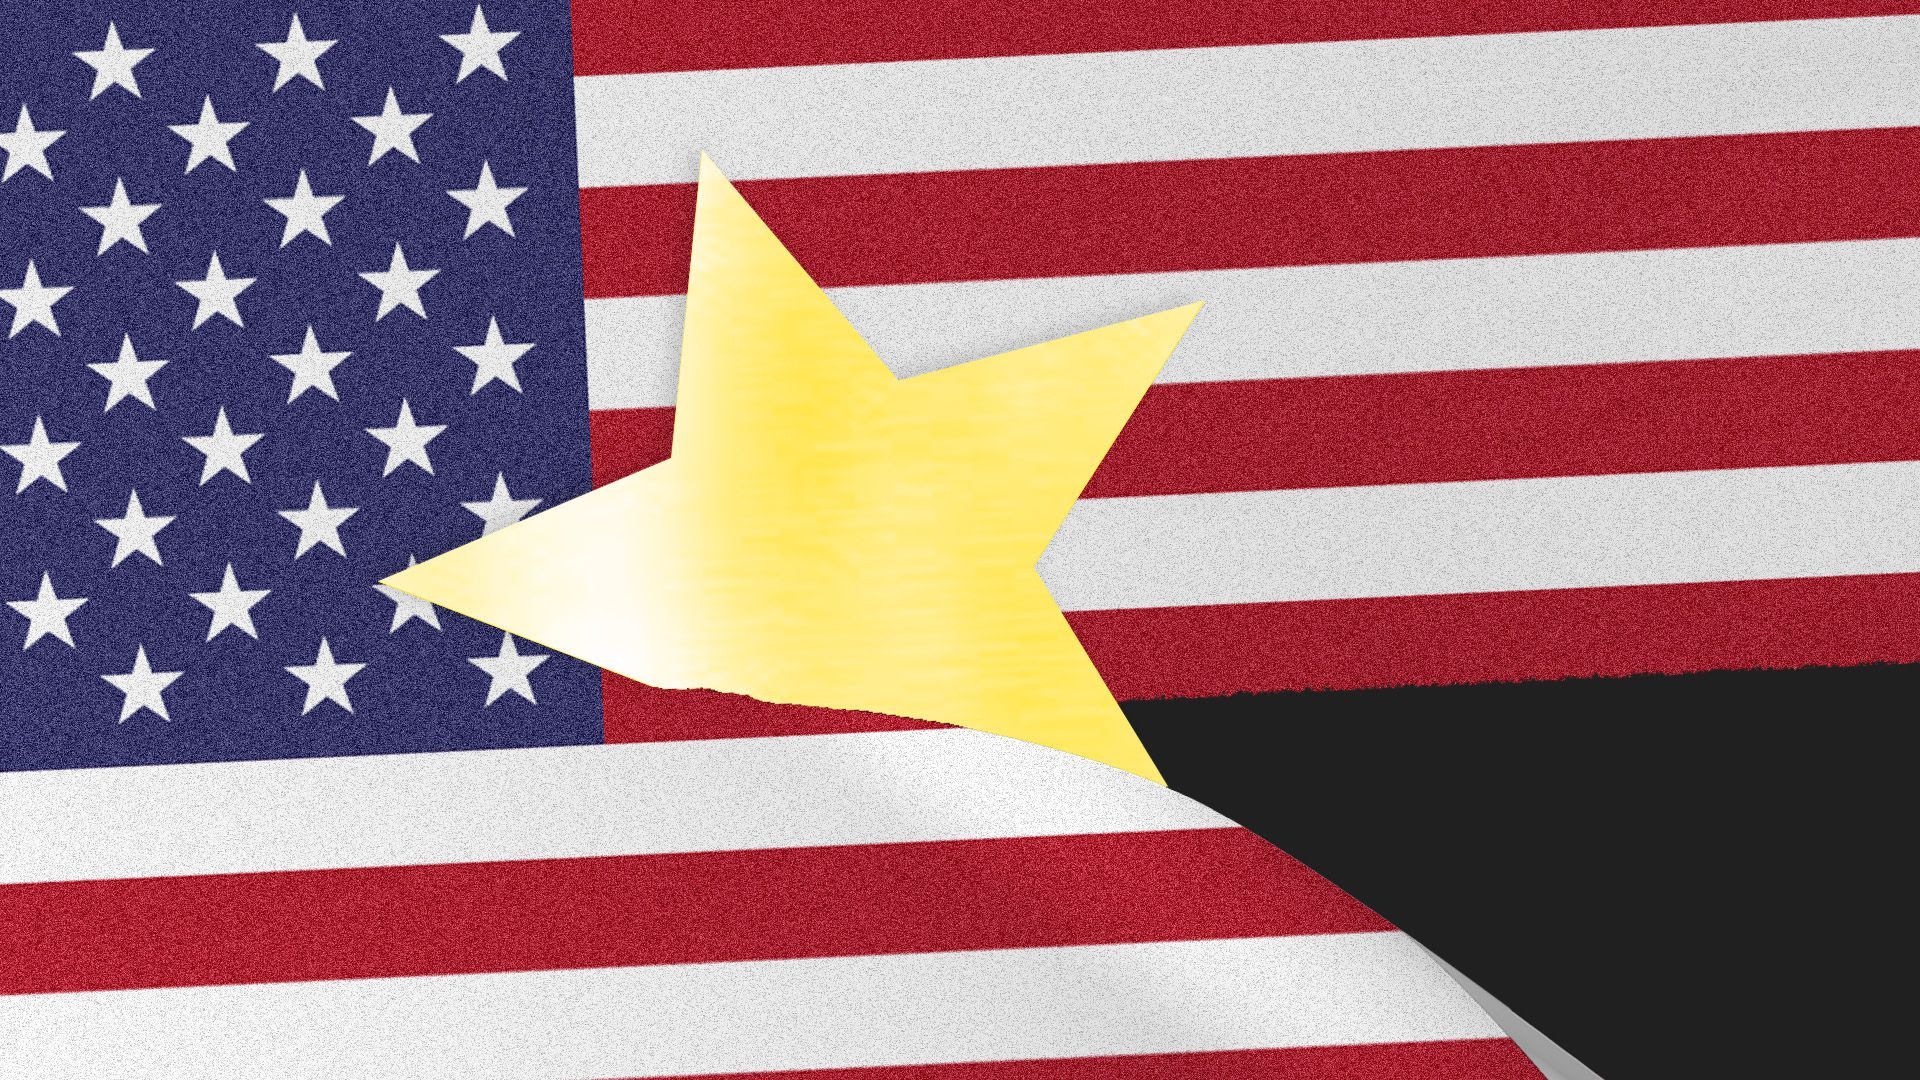 Illustration of a gold star cutting through the American flag